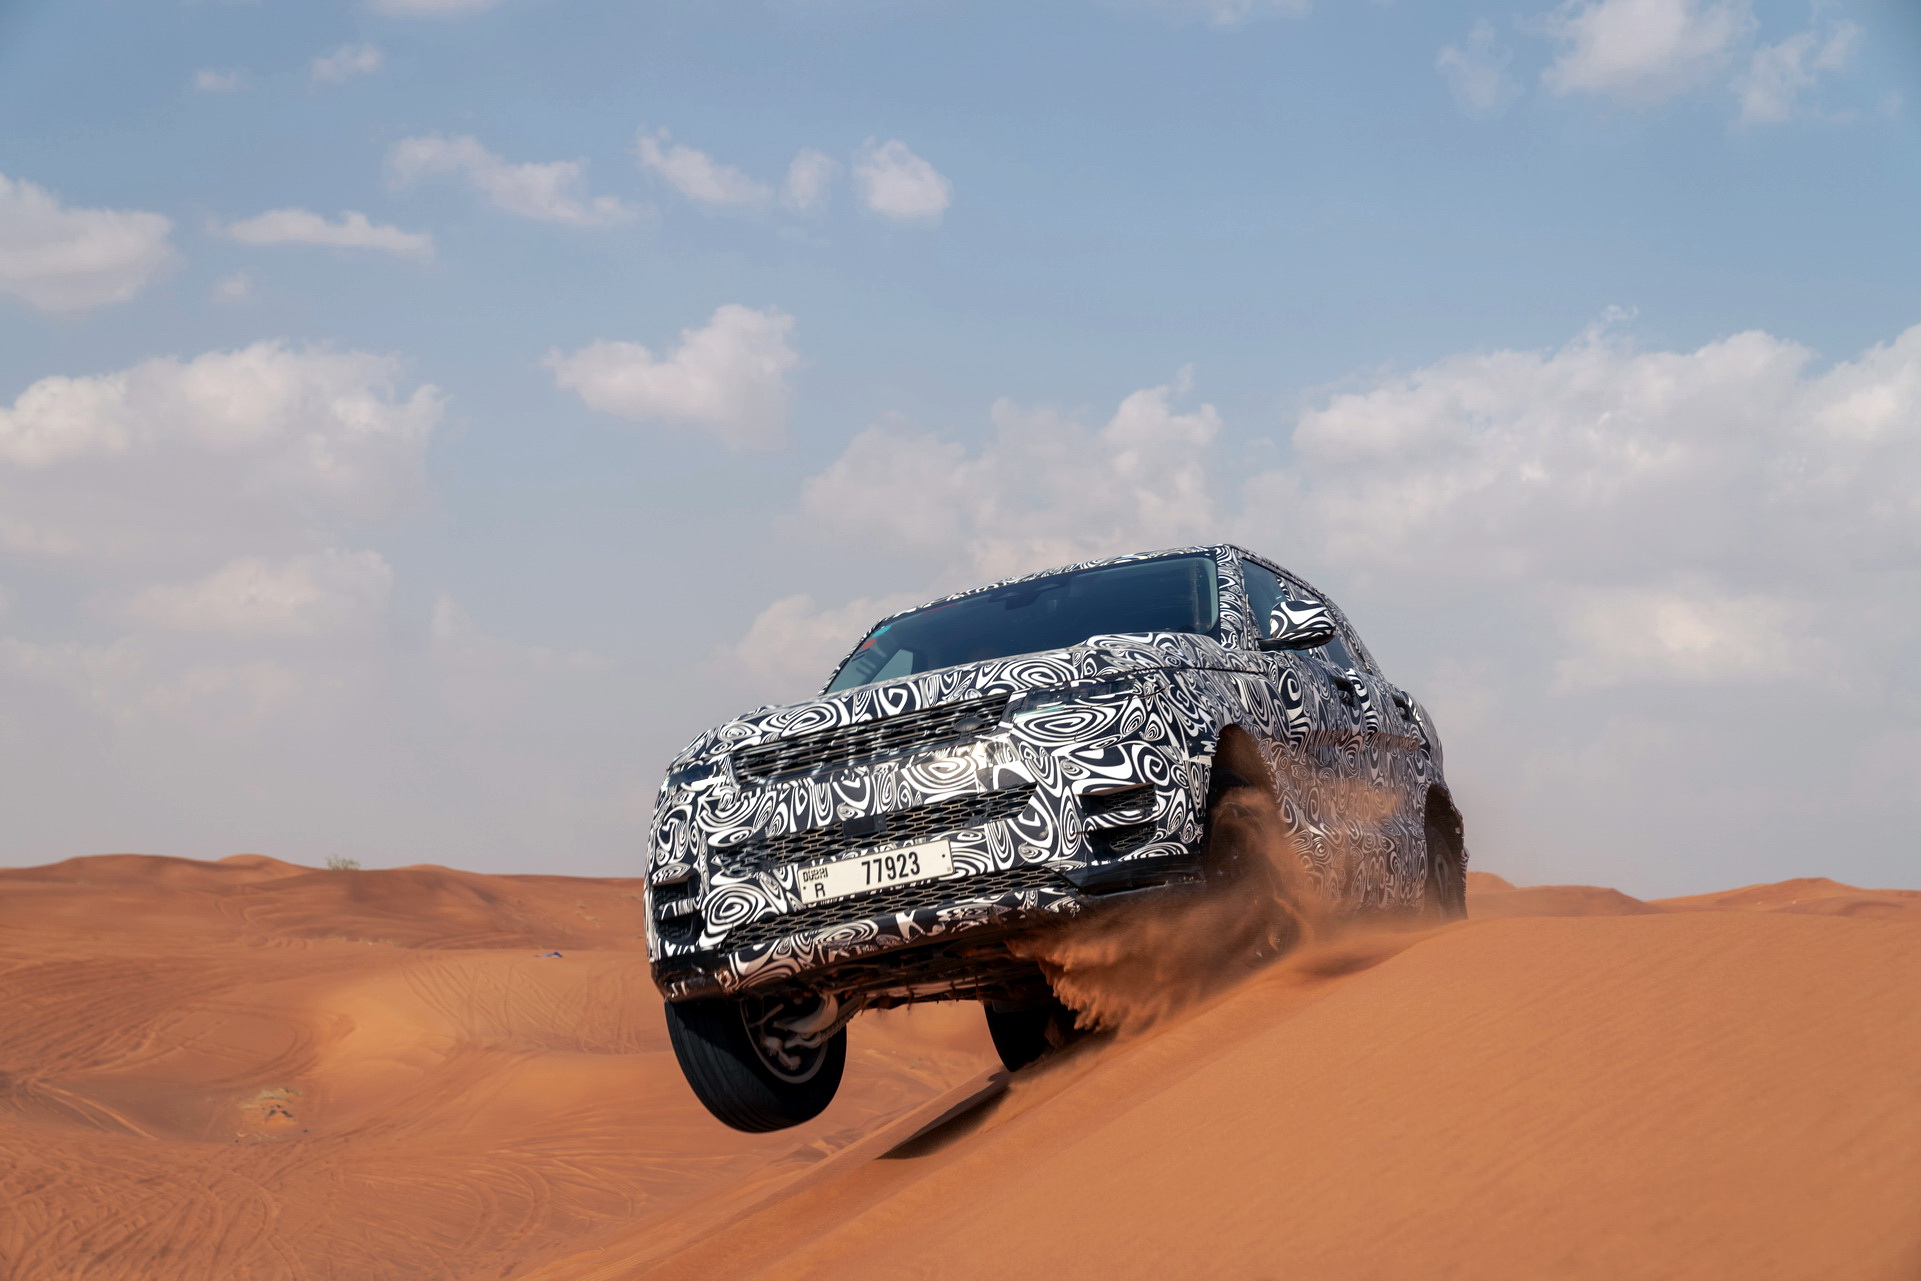 2023 Range Rover Sport Proves Coolly Capable On- or Off-Road